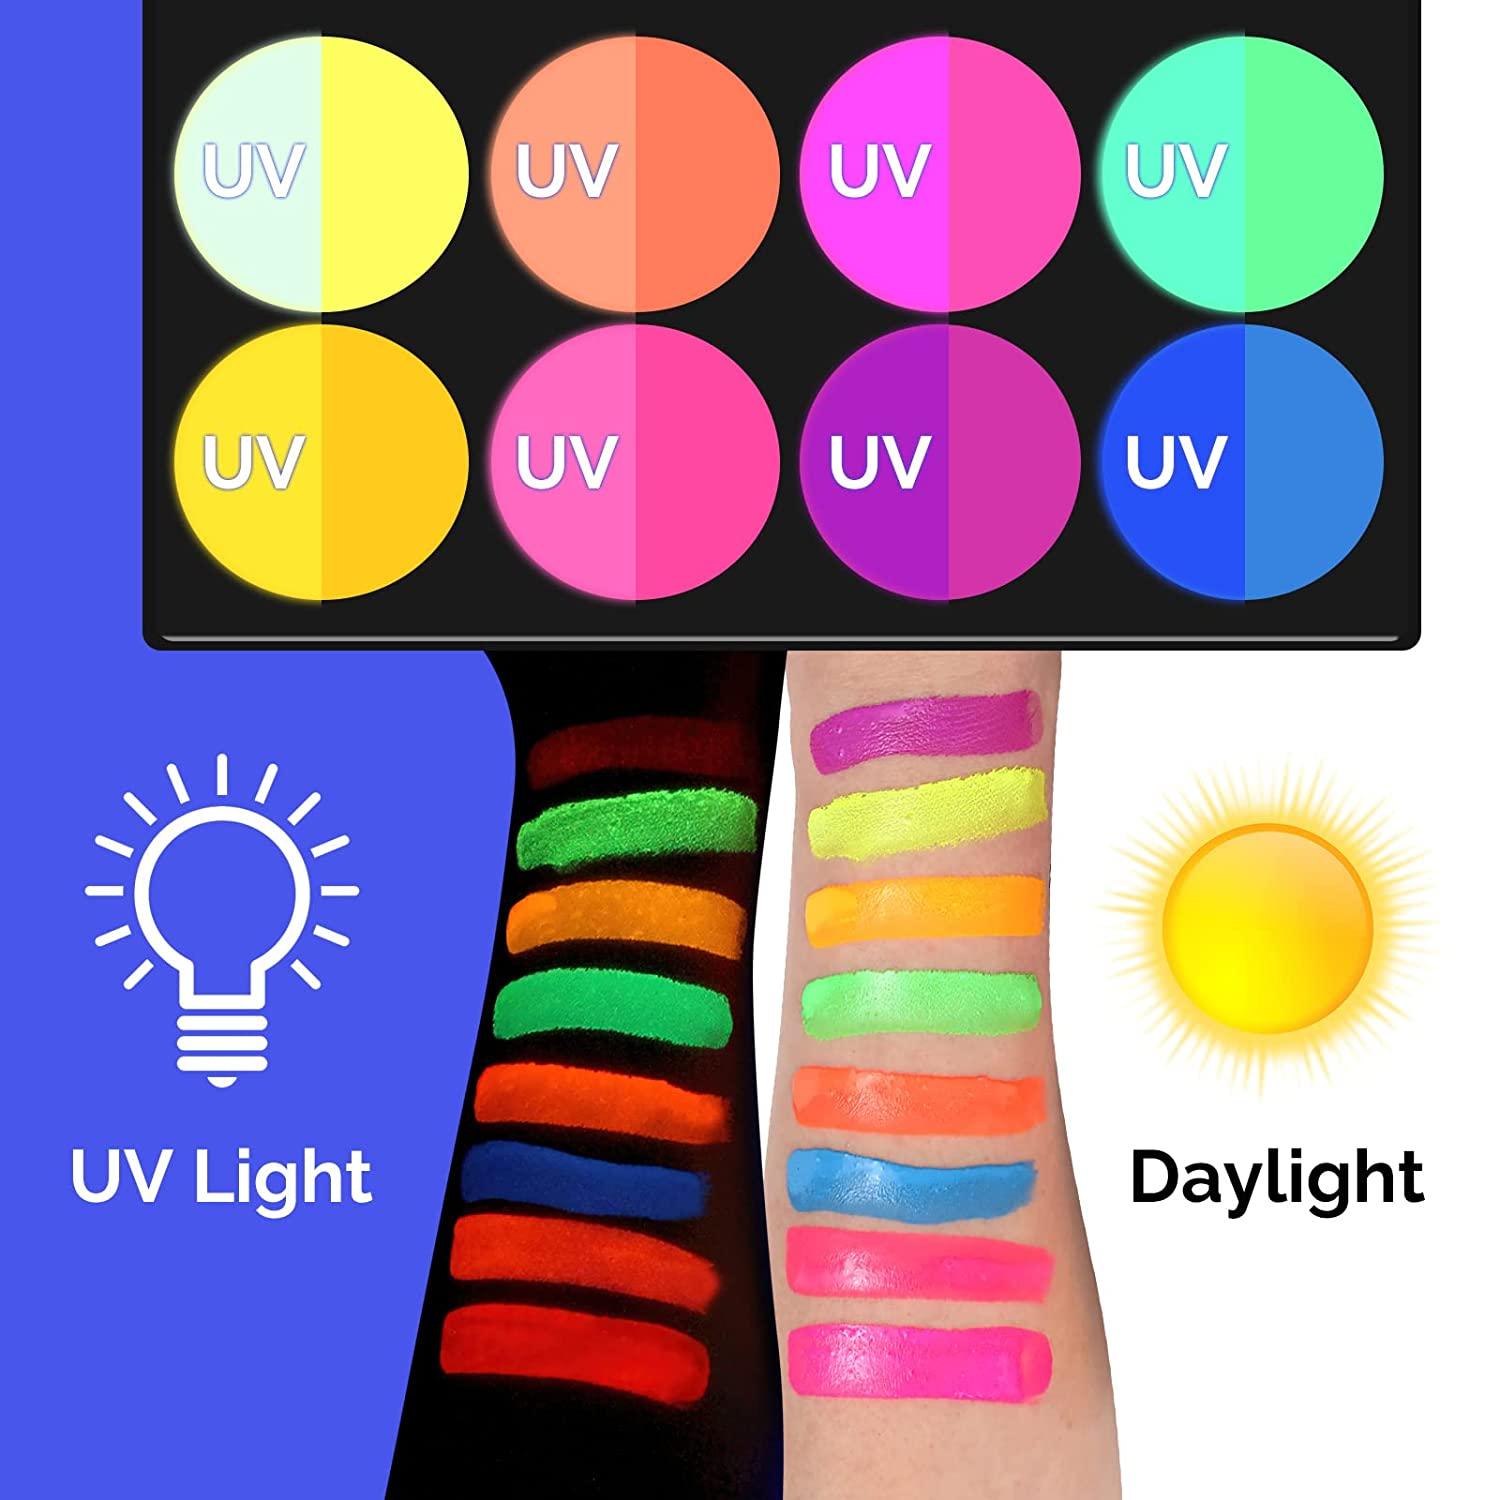 Neon-Face-Paint Nontoxic-and-Washable-Neon-Body-Paint UV-Glow-Paint-in  the-Black-Light-with-Brush-and-Mode-Cards  Glow-in-the-Dark-Paint-for-Halloween-Festivals-Party-Cosplay-Chritsmas  8-Vibrant-Colors